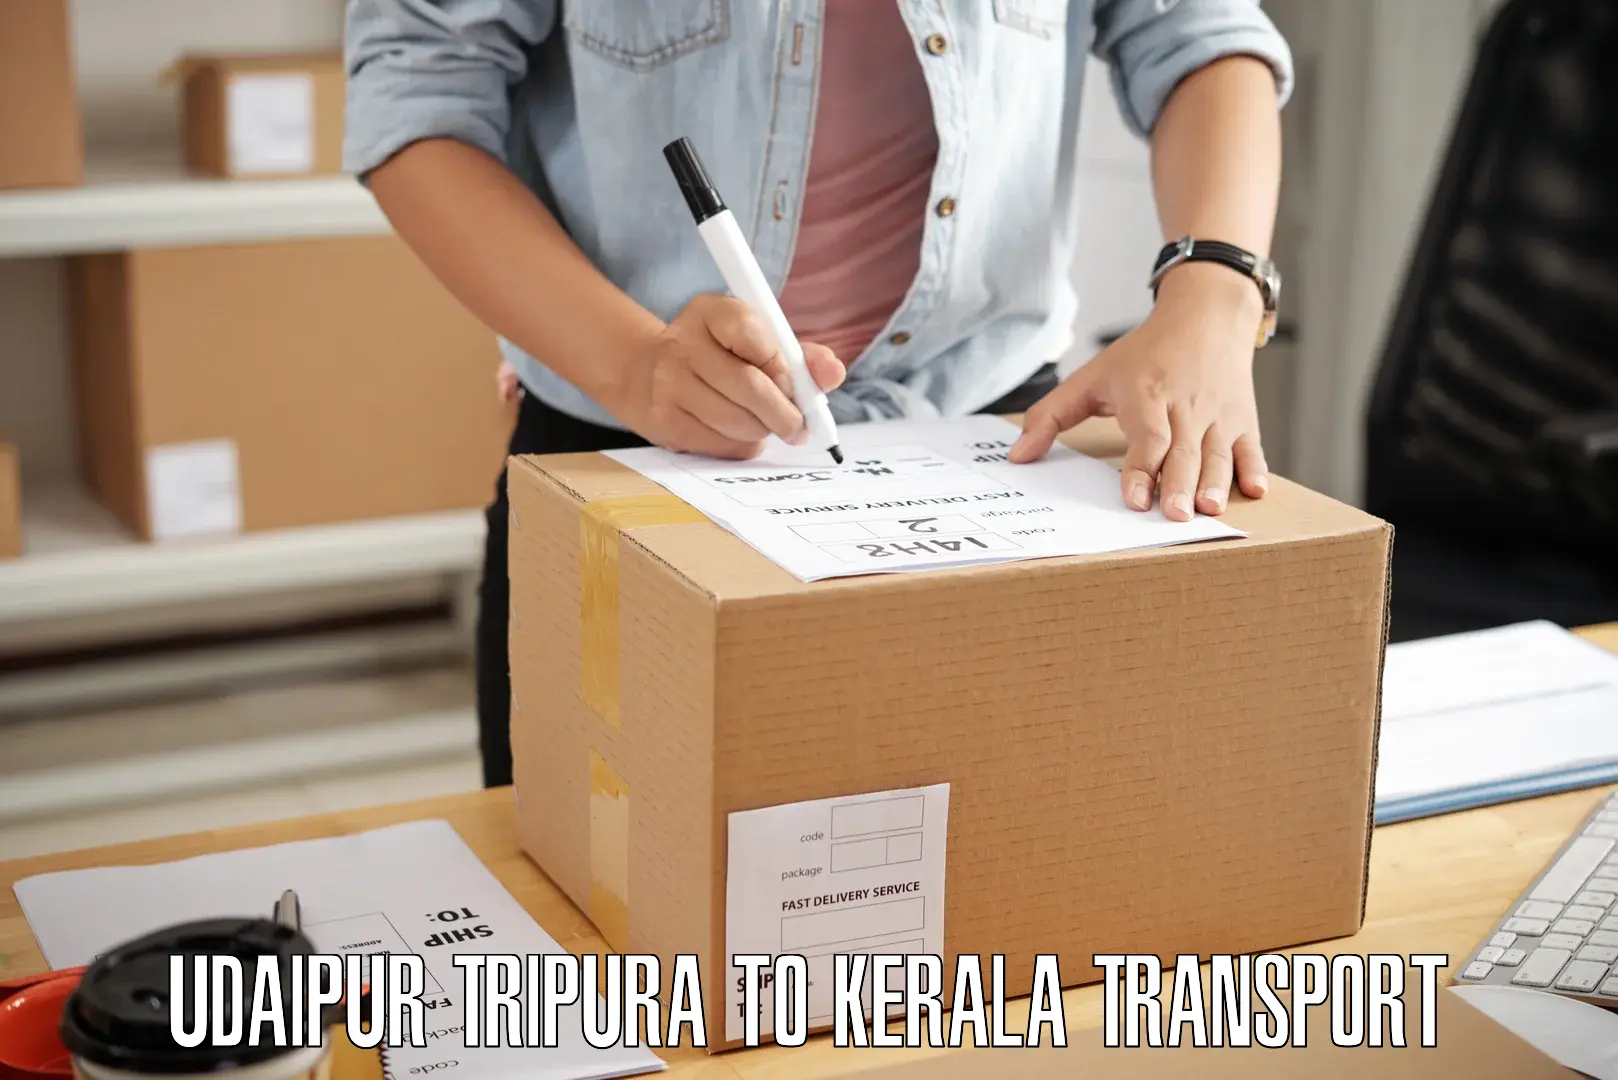 Best transport services in India Udaipur Tripura to Kuchi